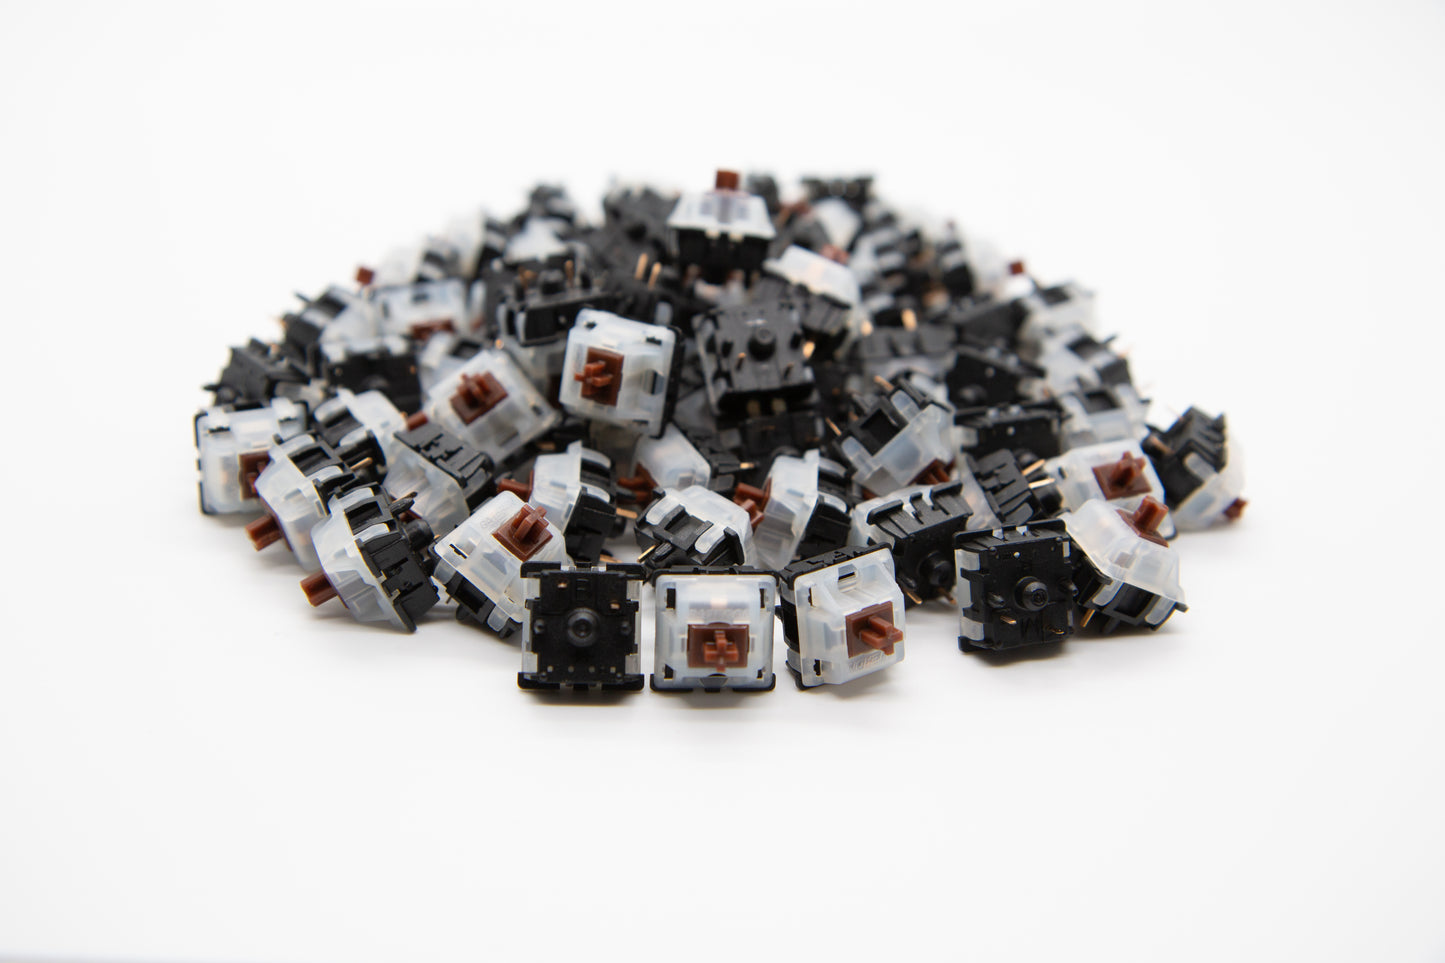 Close-up shot of a pile of Gateron Brown mechanical keyboard switches featuring black and white housing brown stems